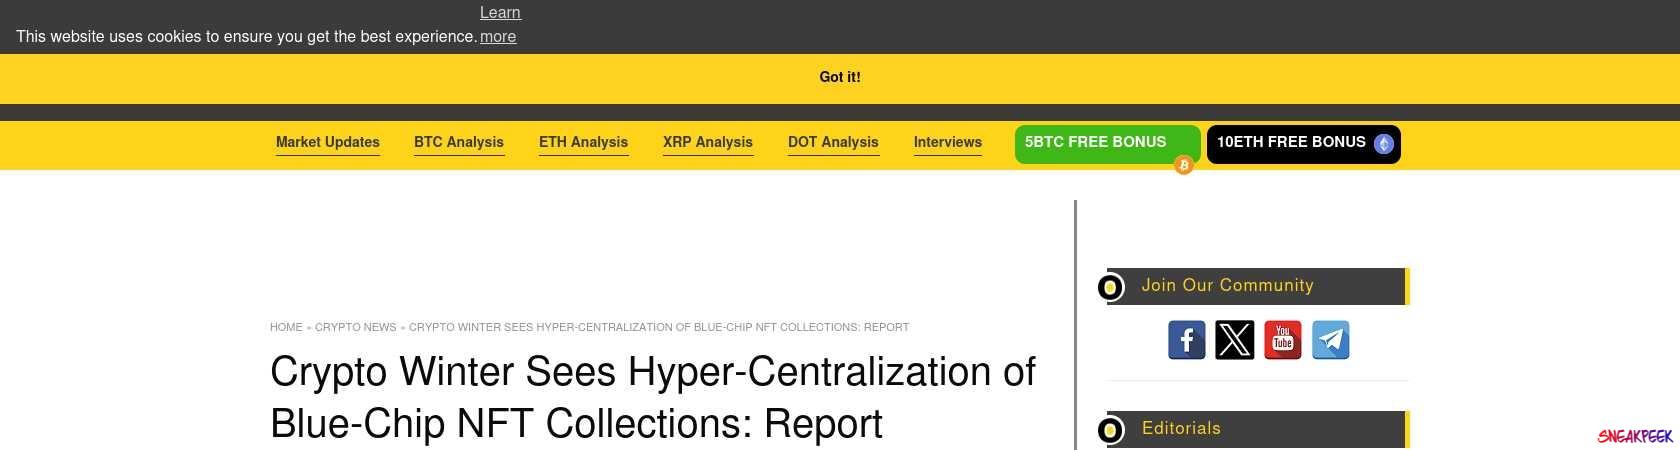 Read the full Article:  ⭲ Crypto Winter Sees Hyper-Centralization of Blue-Chip NFT Collections: Report